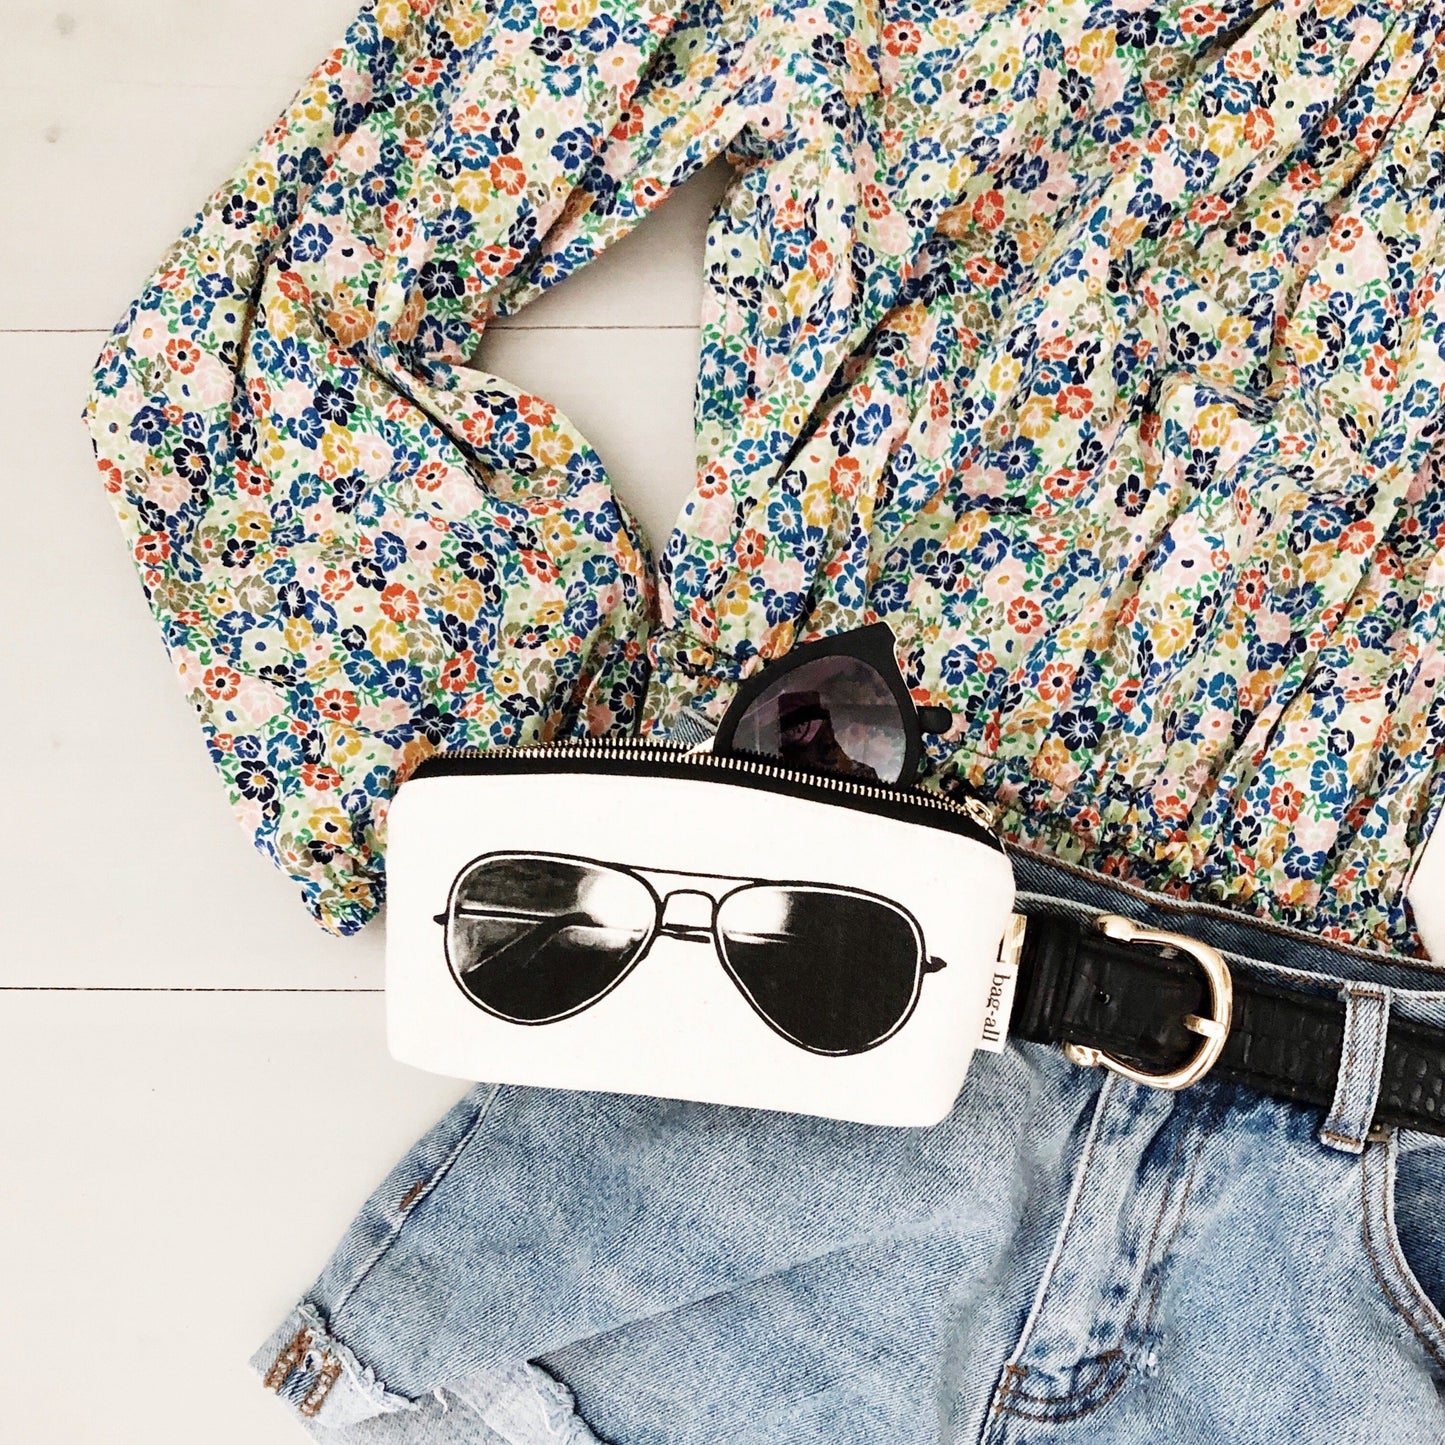 
                                      
                                        Pilot glasses padded sunglasses case with a floral shirt. 
                                      
                                    